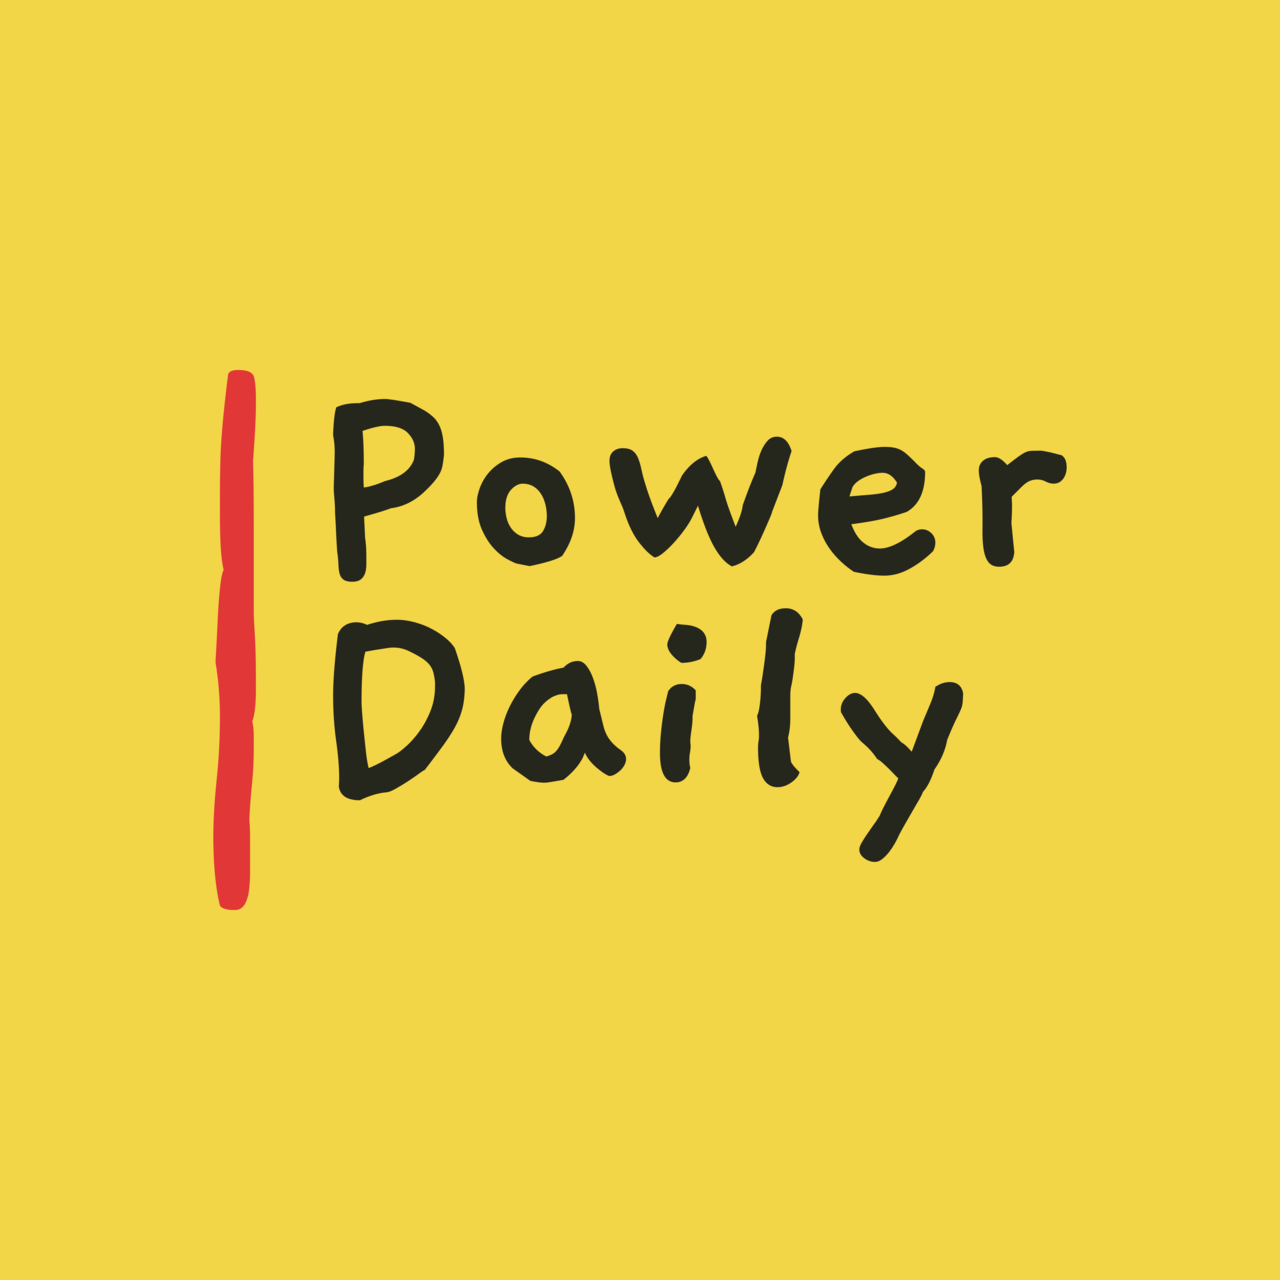 Power Daily